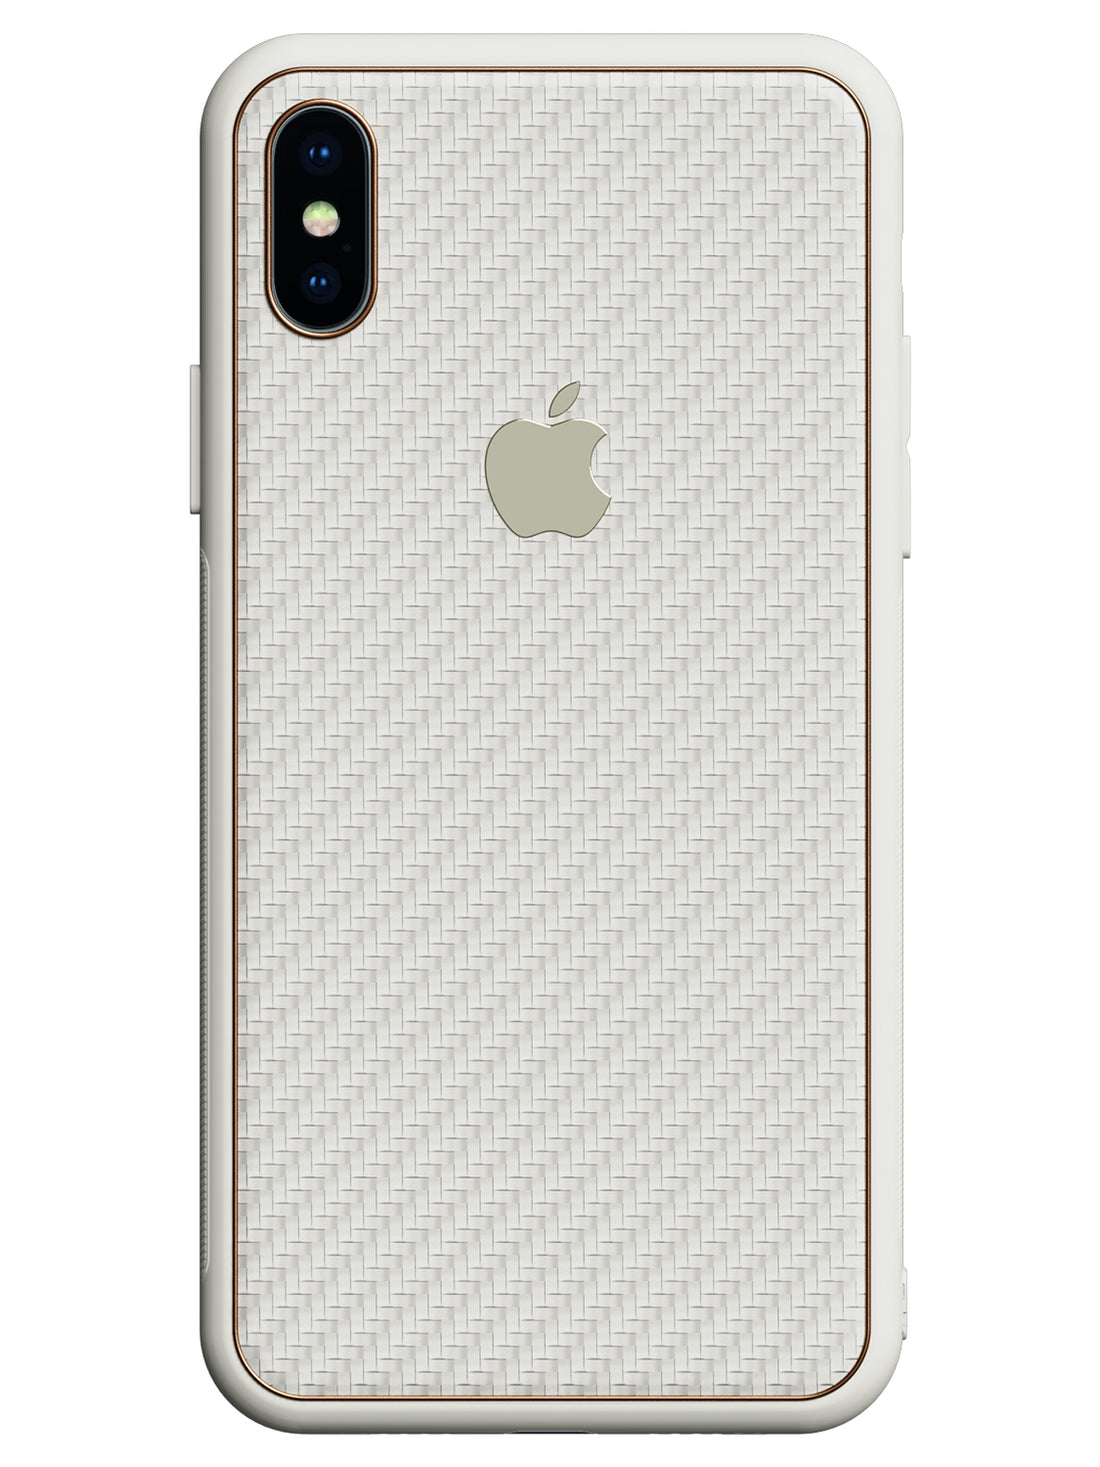 Carbon Leather Chrome Case - iPhone X/XS (White)